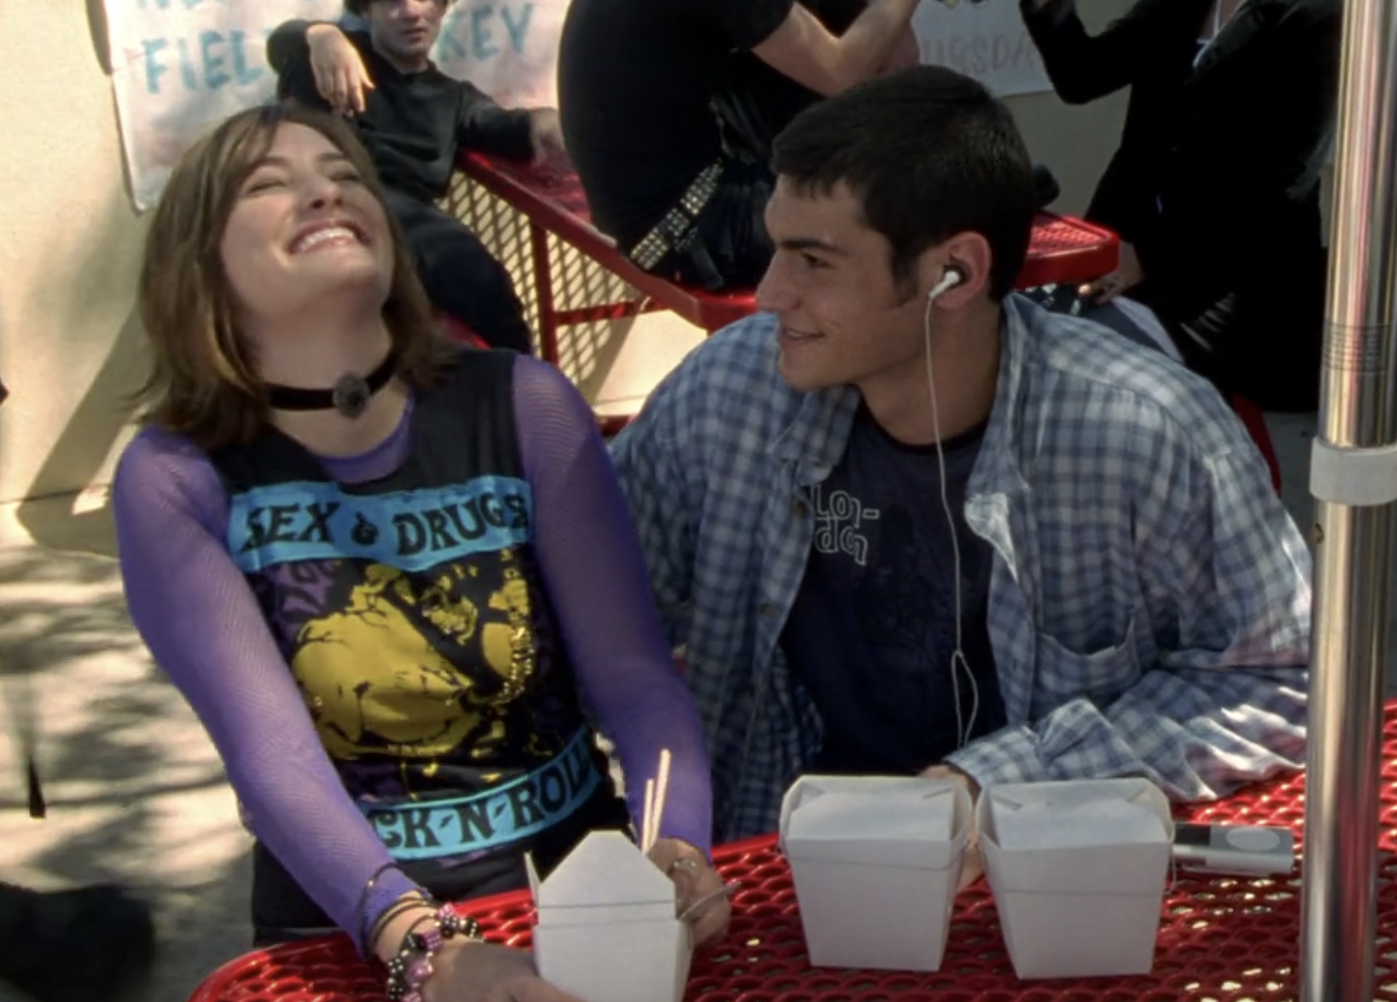 Screenshot from S1E6 of Veronica Mars. Wanda and Felix are seated at a lunch table with Chinese food takeout containers in front of them. Wanda has her head thrown back in laughter. Felix is looking at her smiling, a headphone in his ear.